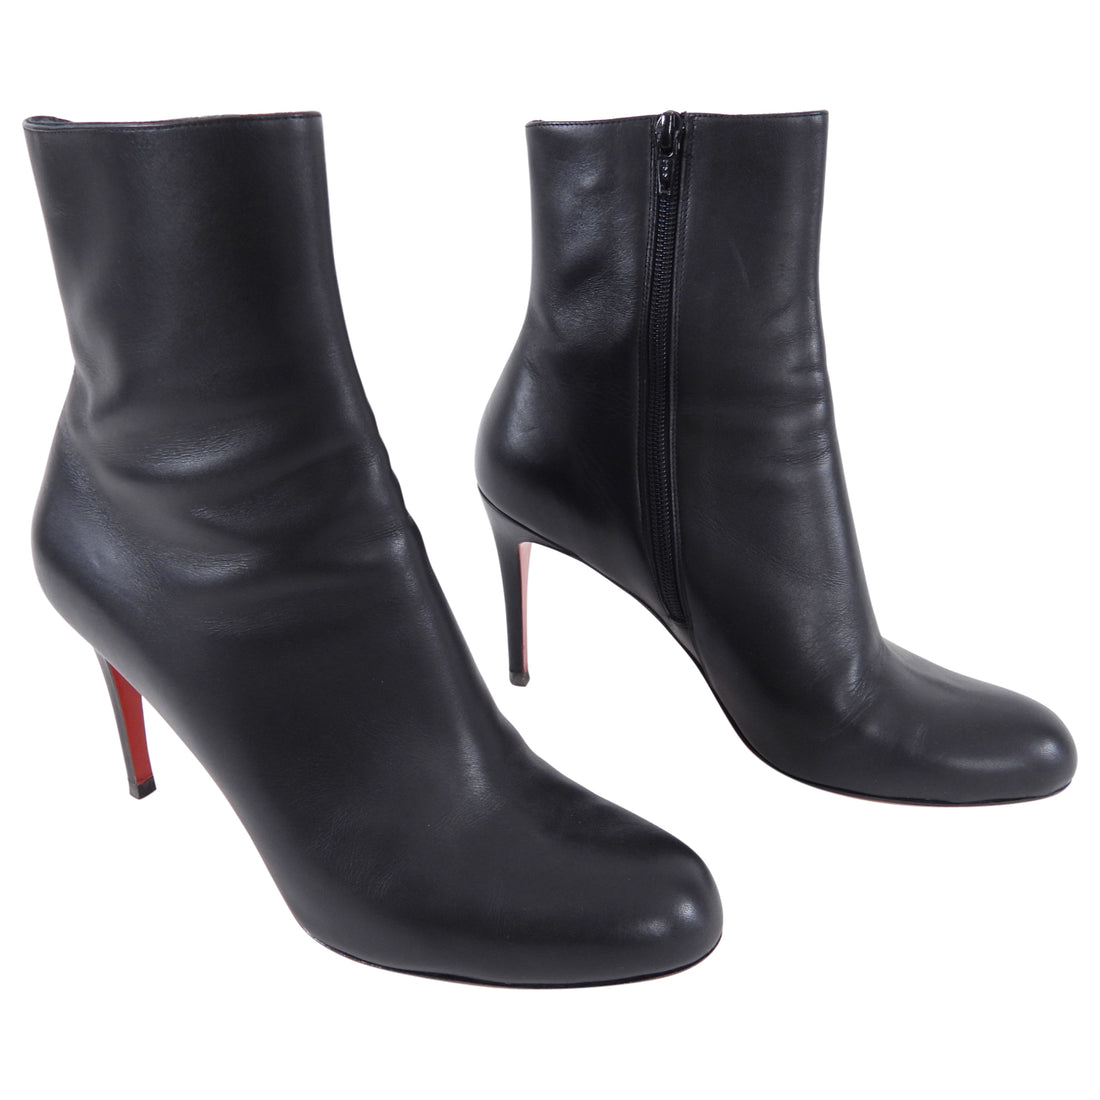 Christian Louboutin Black Leather Ankle Boots.  Round toe, 95mm high heel, interior side zipper.  Marked size EU40 (USA 9.5).  Excellent pre-owned condition with resoled bottoms and some light wear to back heels as pictured.  Without duster or box.